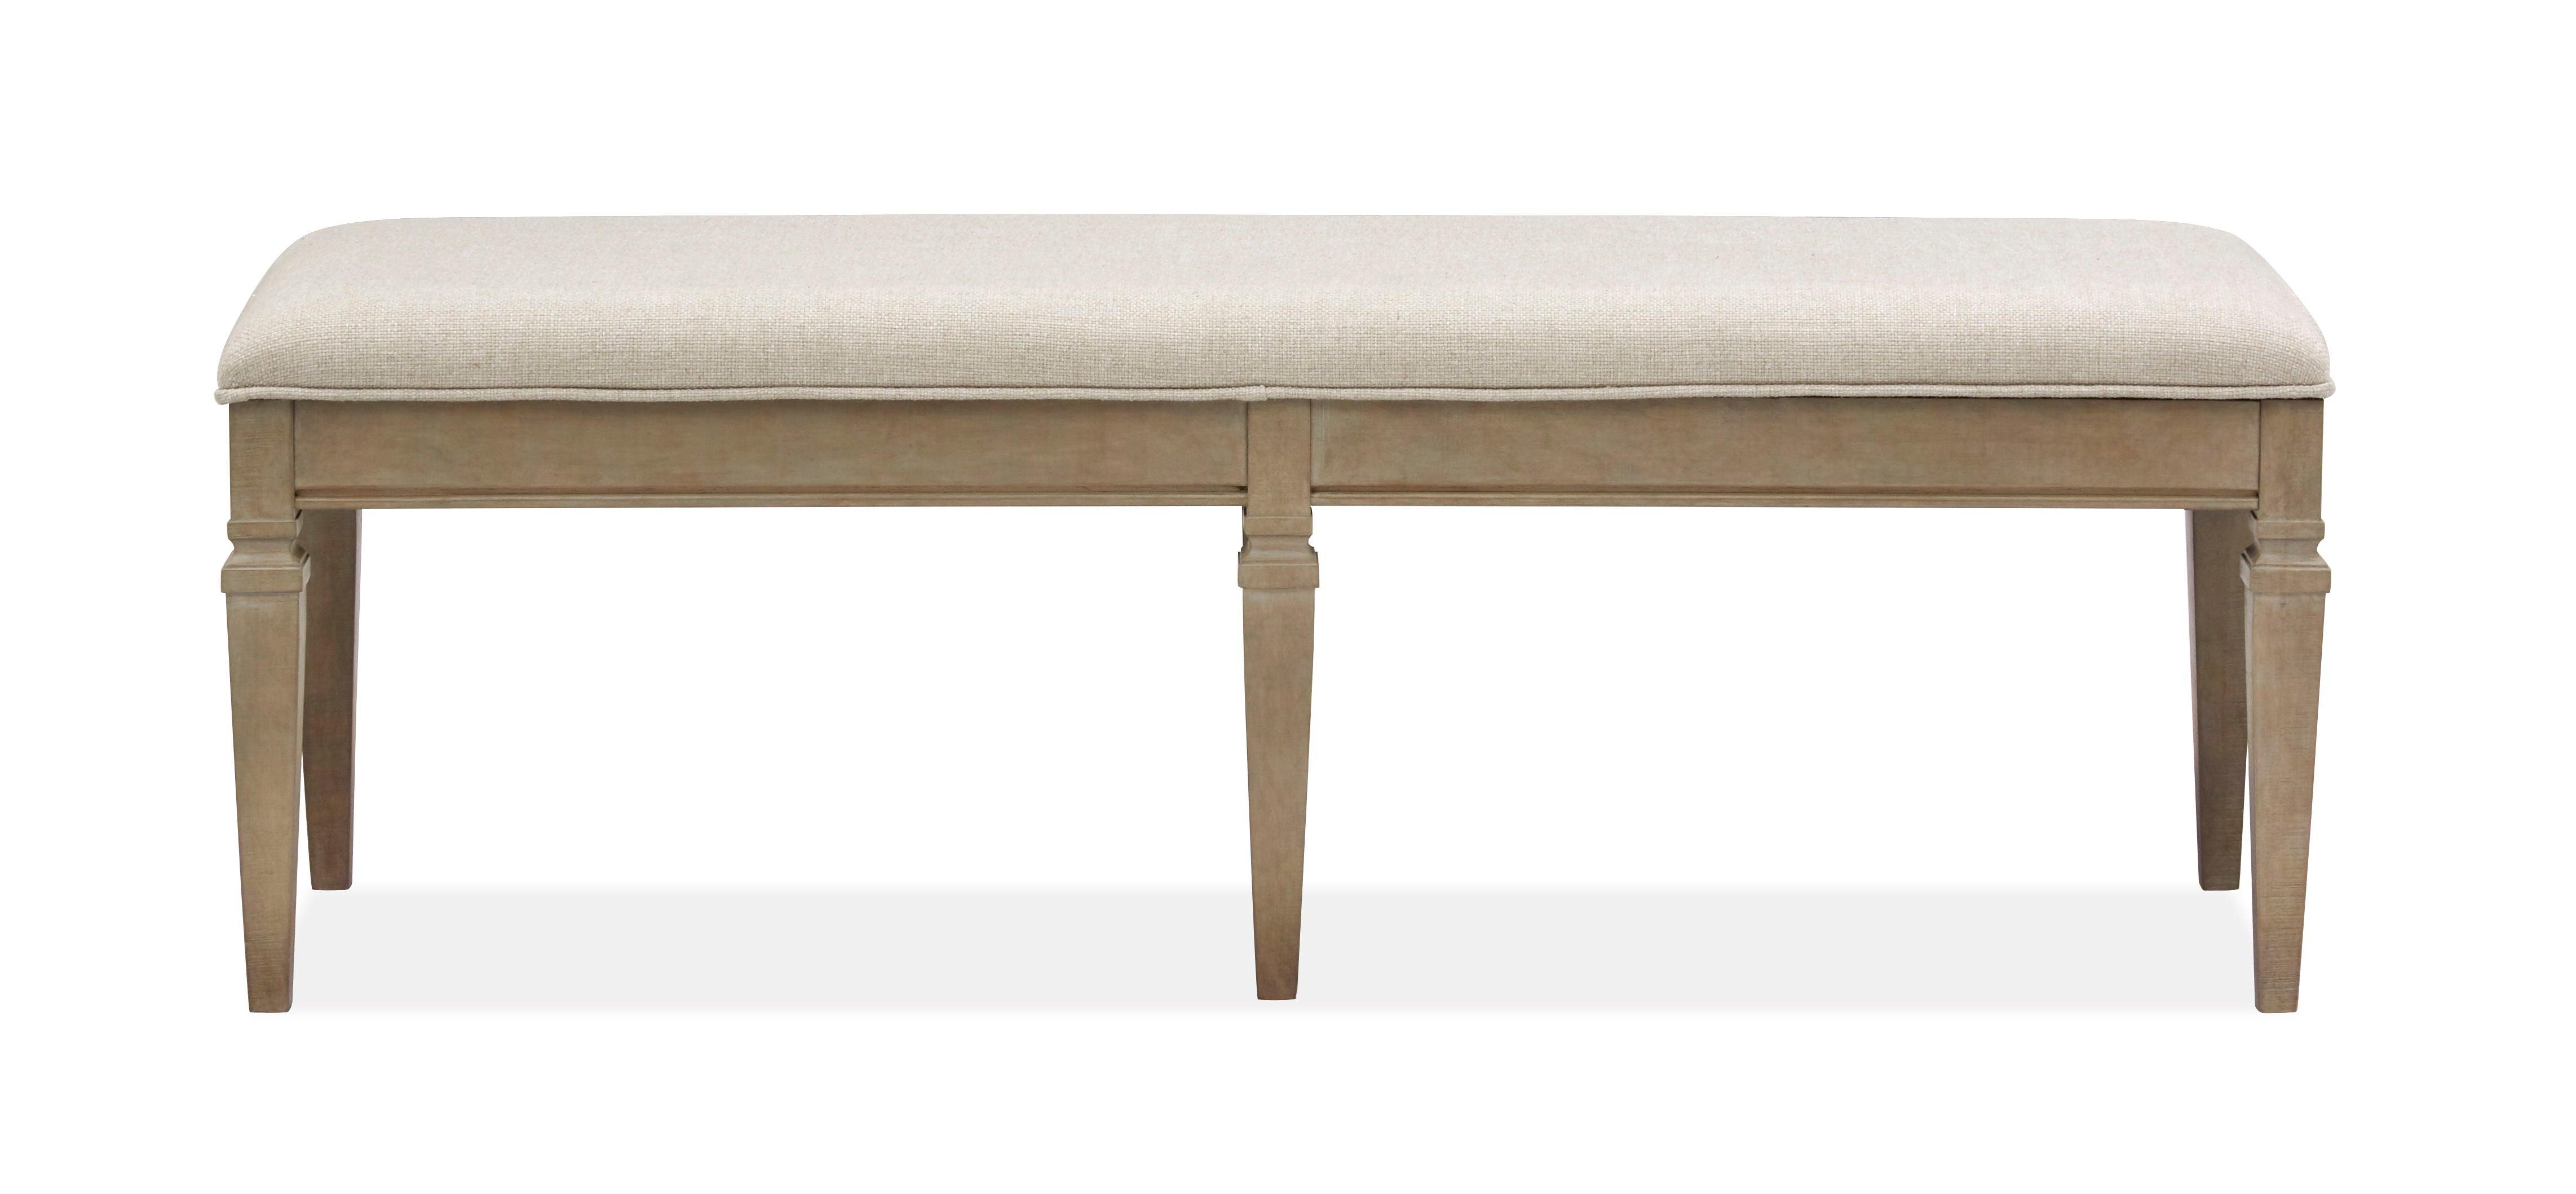 Magnussen Furniture - Lancaster - Bench With Upholstered Seat - Dovetail Grey - 5th Avenue Furniture